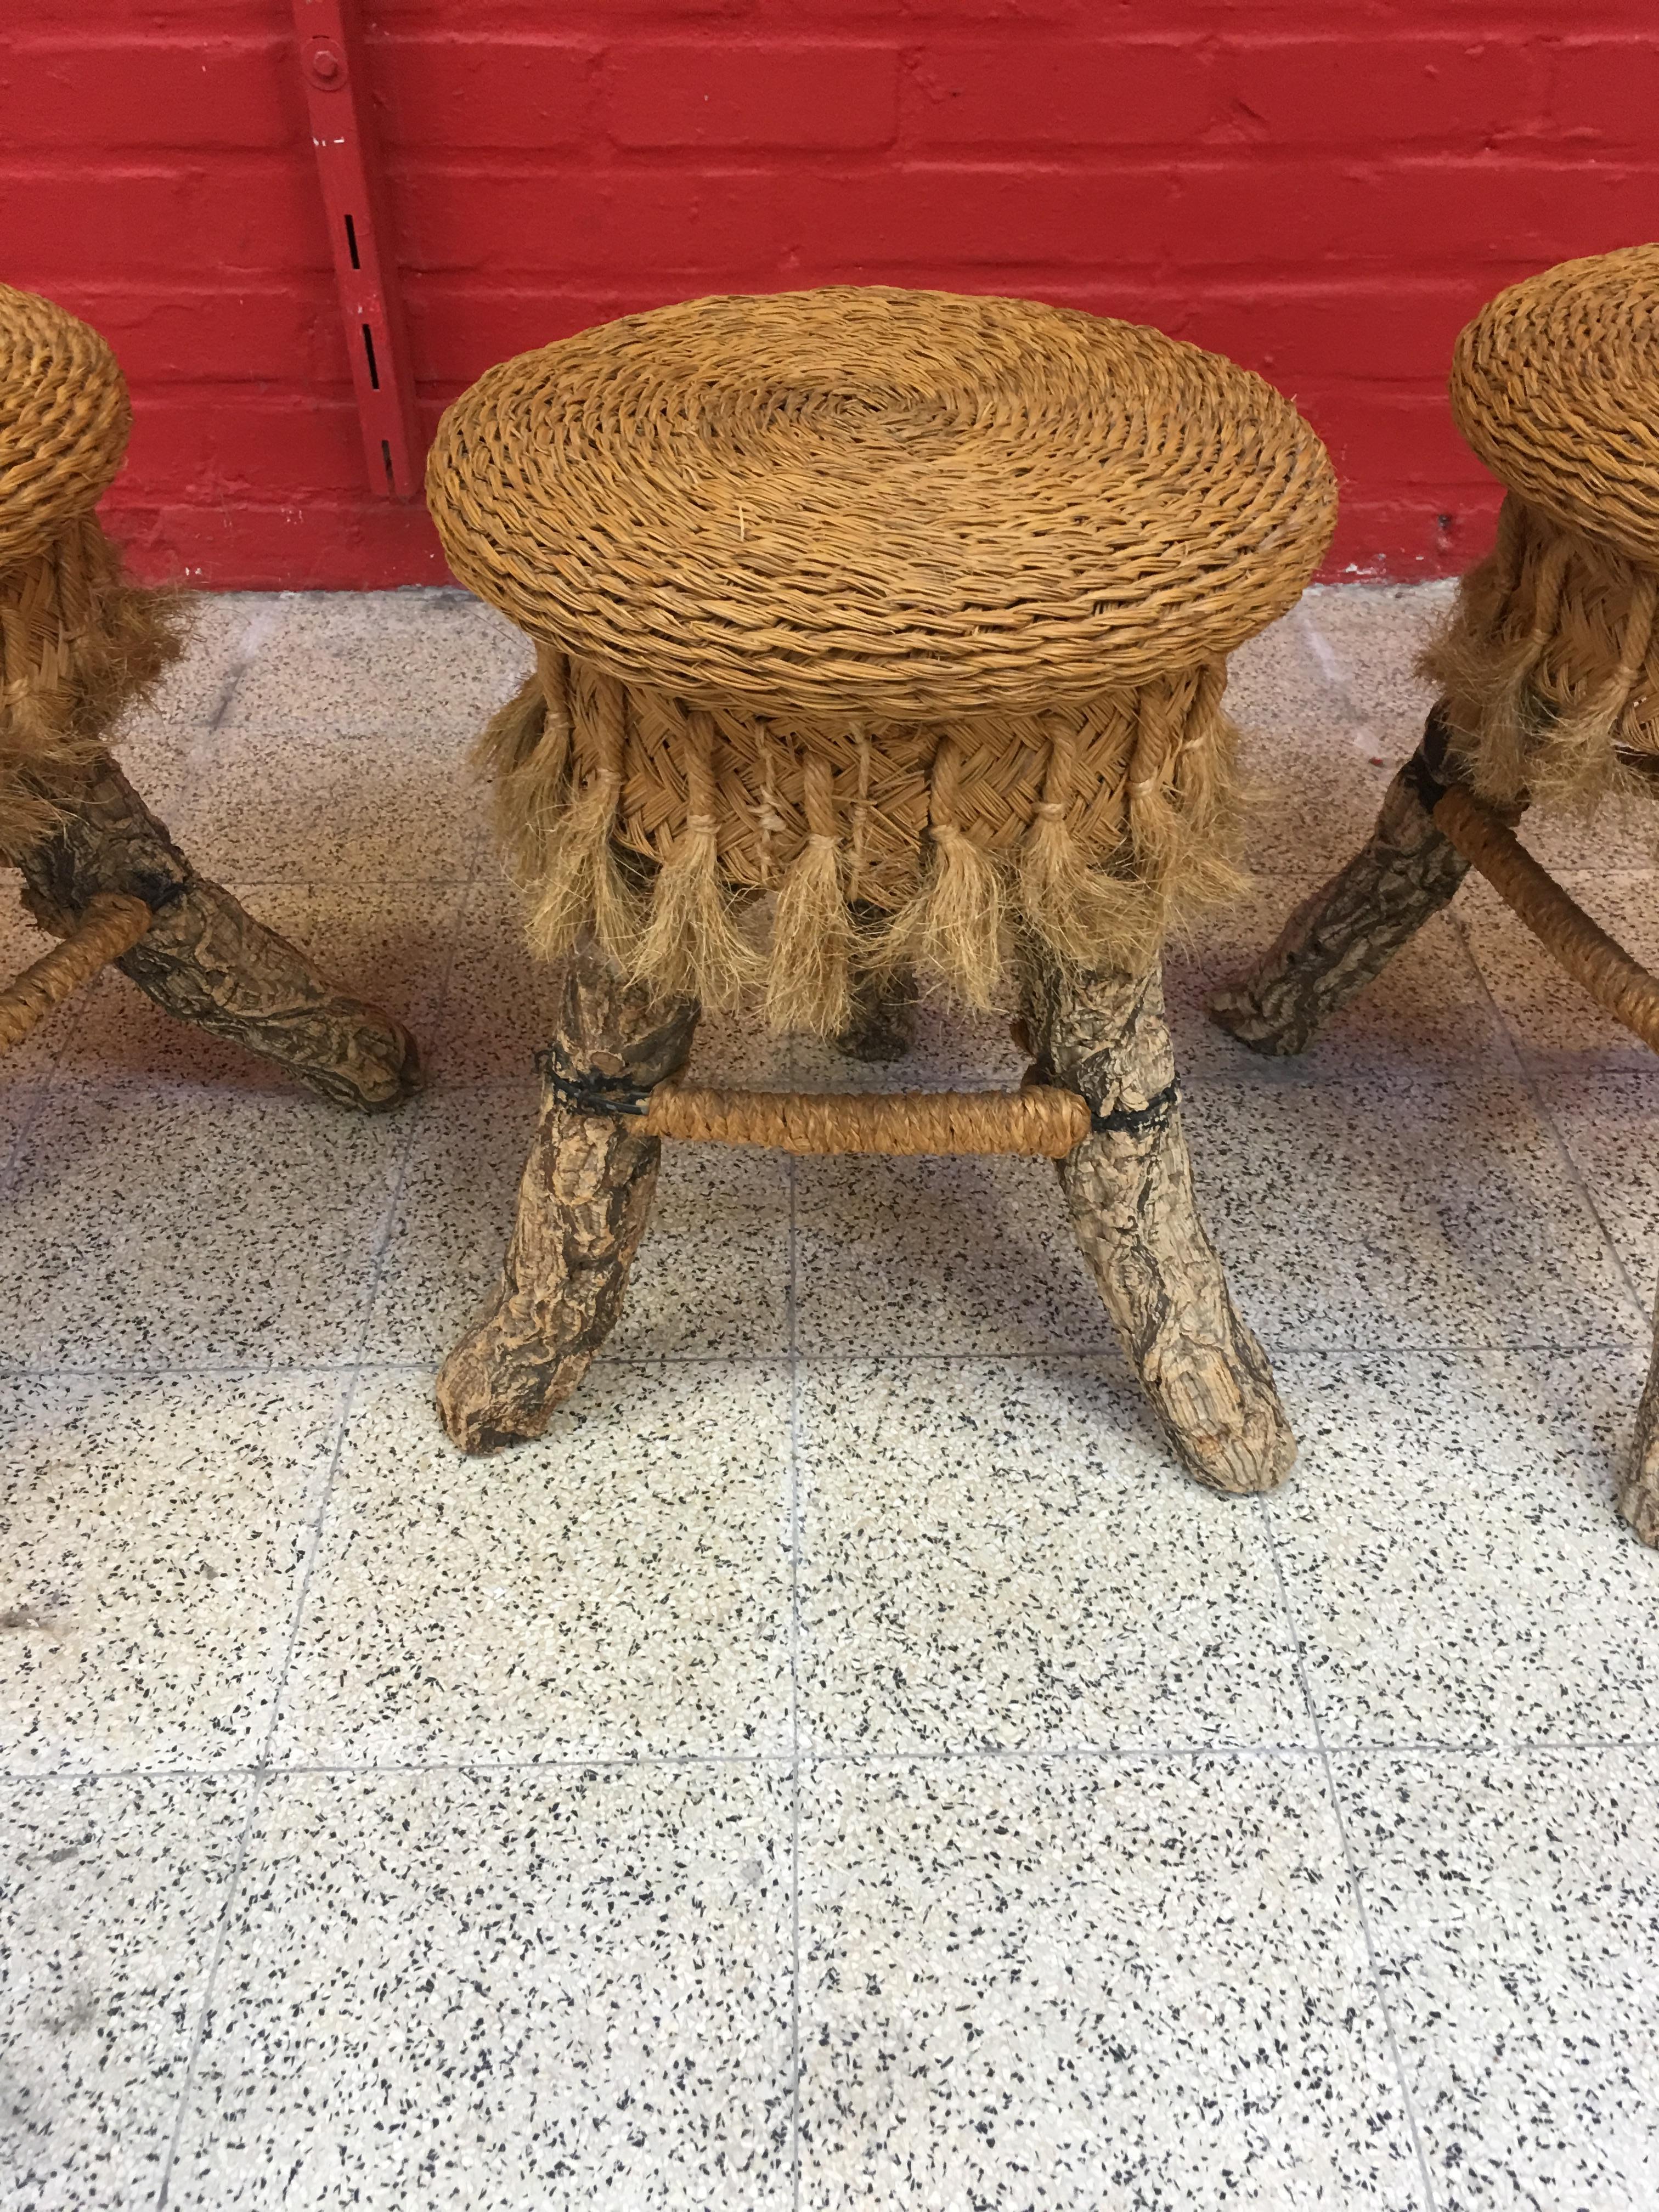 Organic Table and Its 4 Stools, Rattan, Rafia, Rope and Branches, circa 1970 For Sale 13